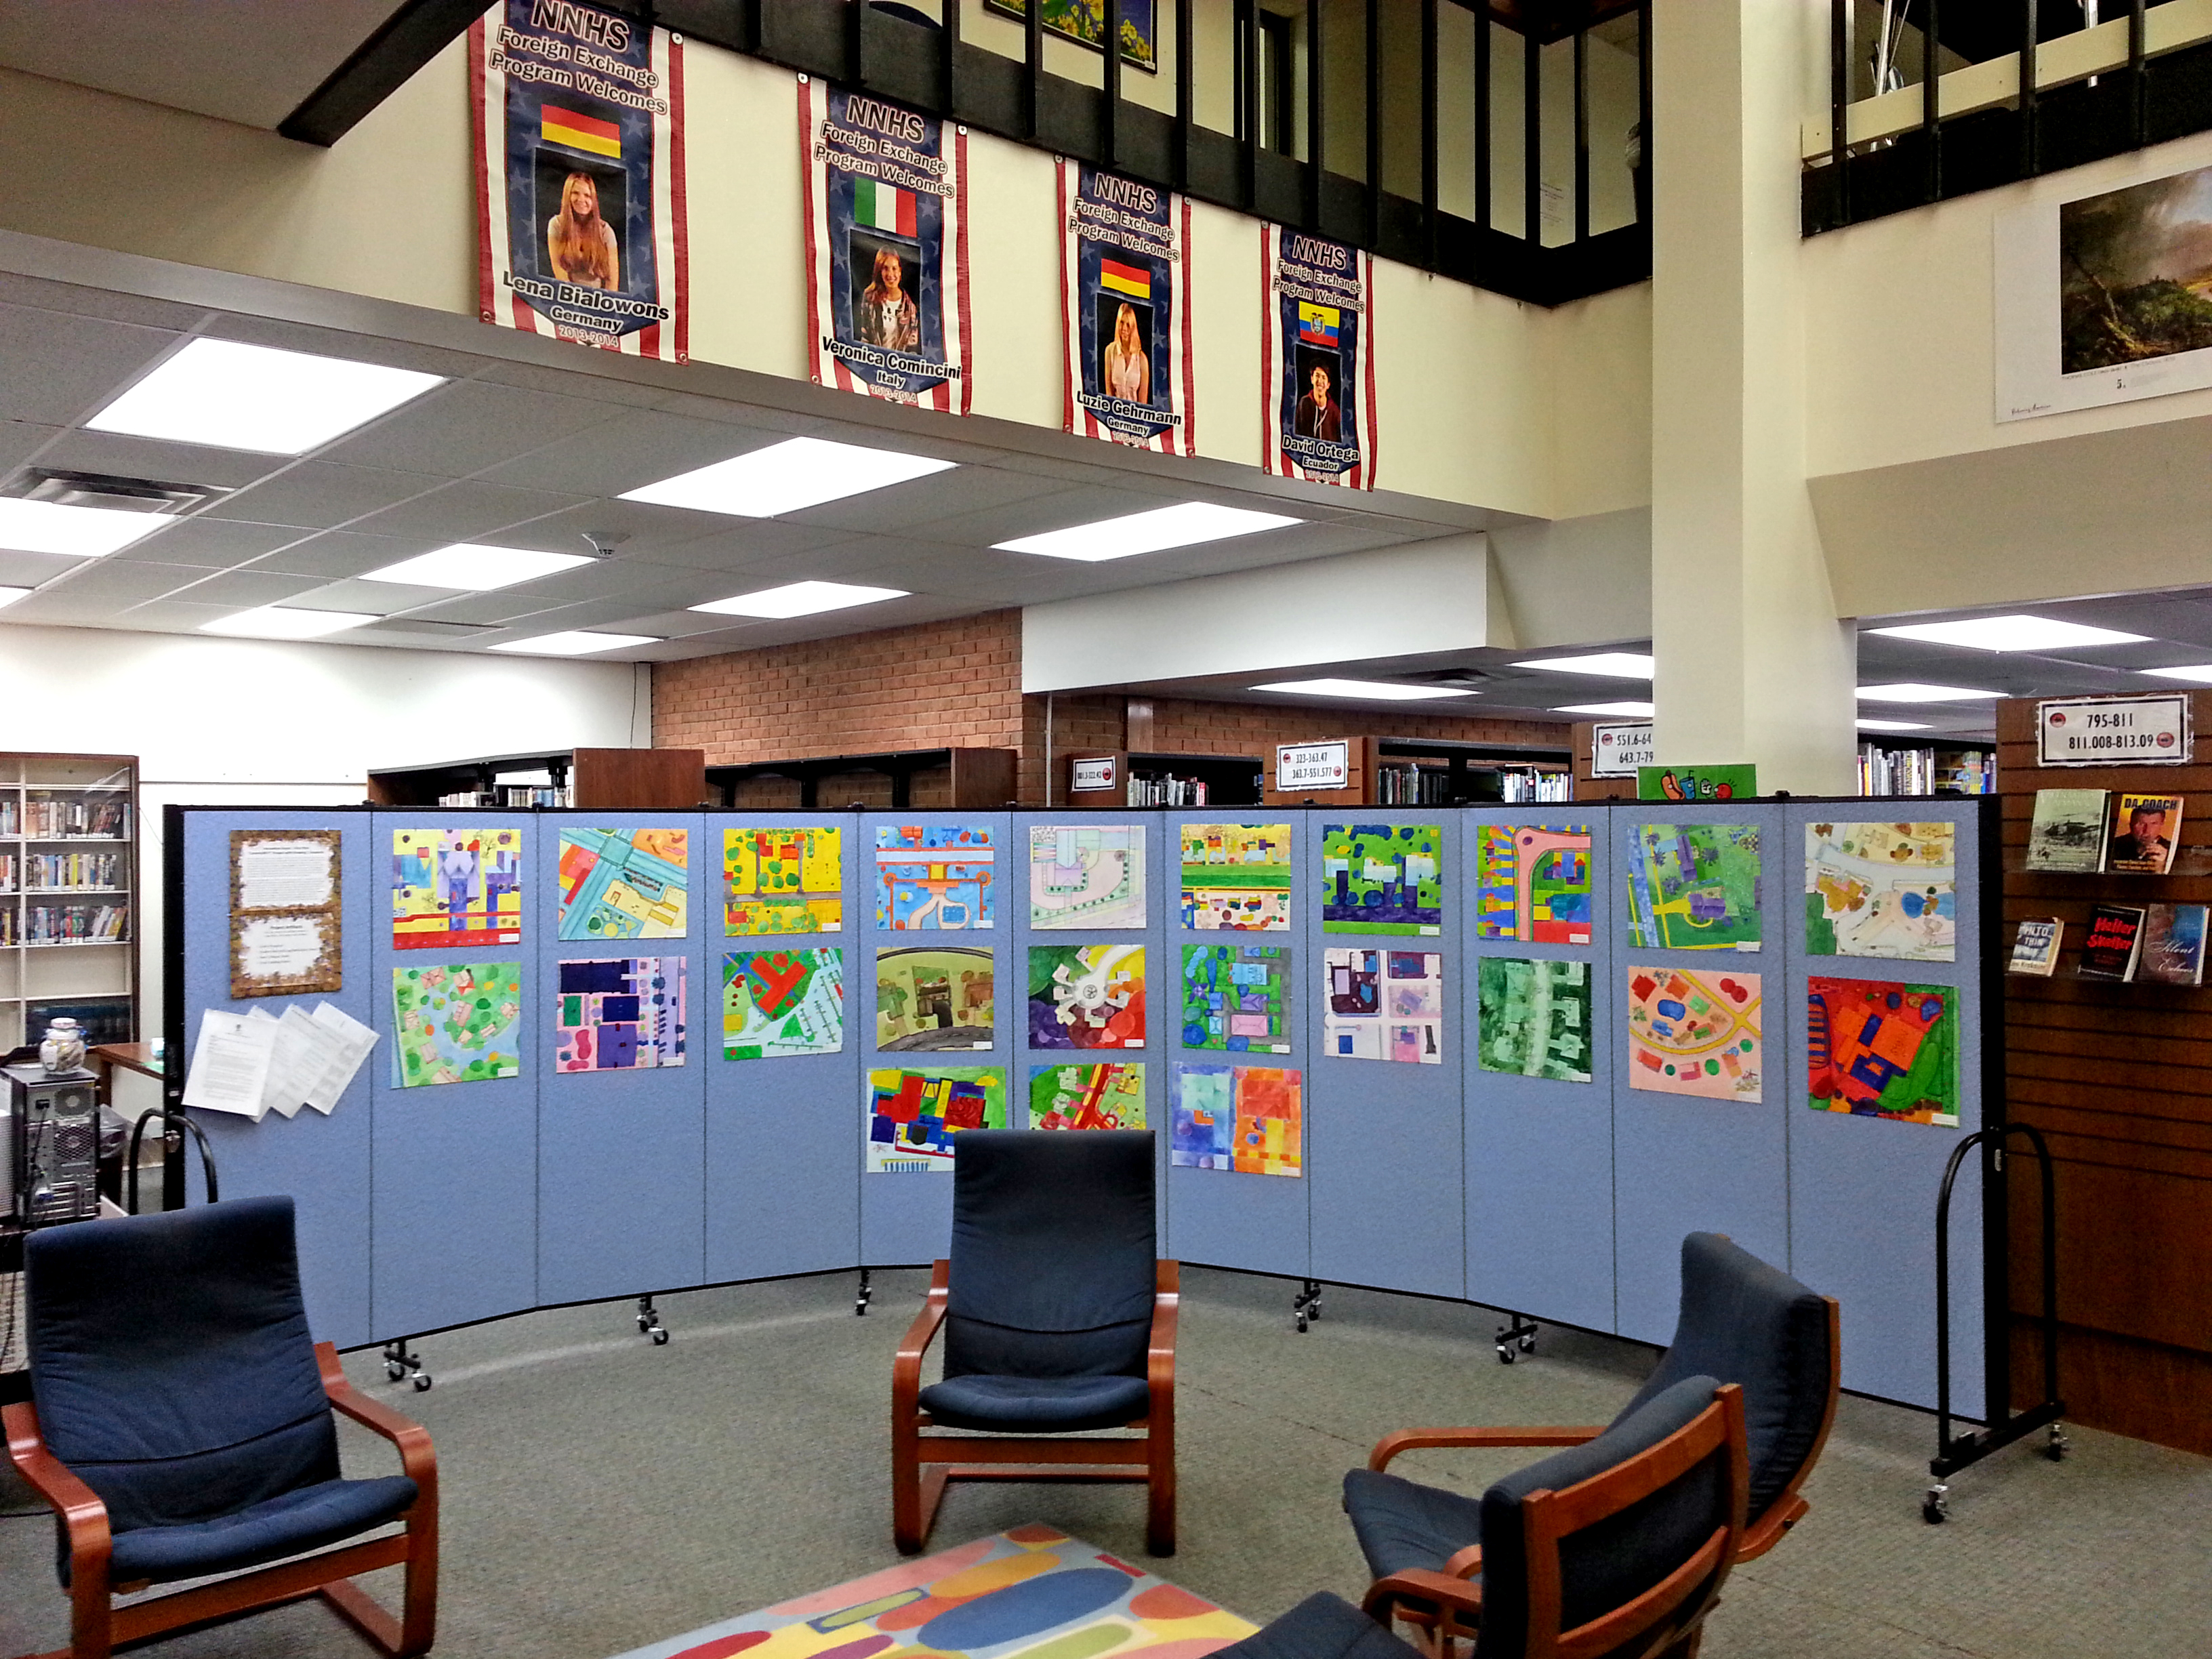 Student artwork displayed on an eleven panel room divider in a school library